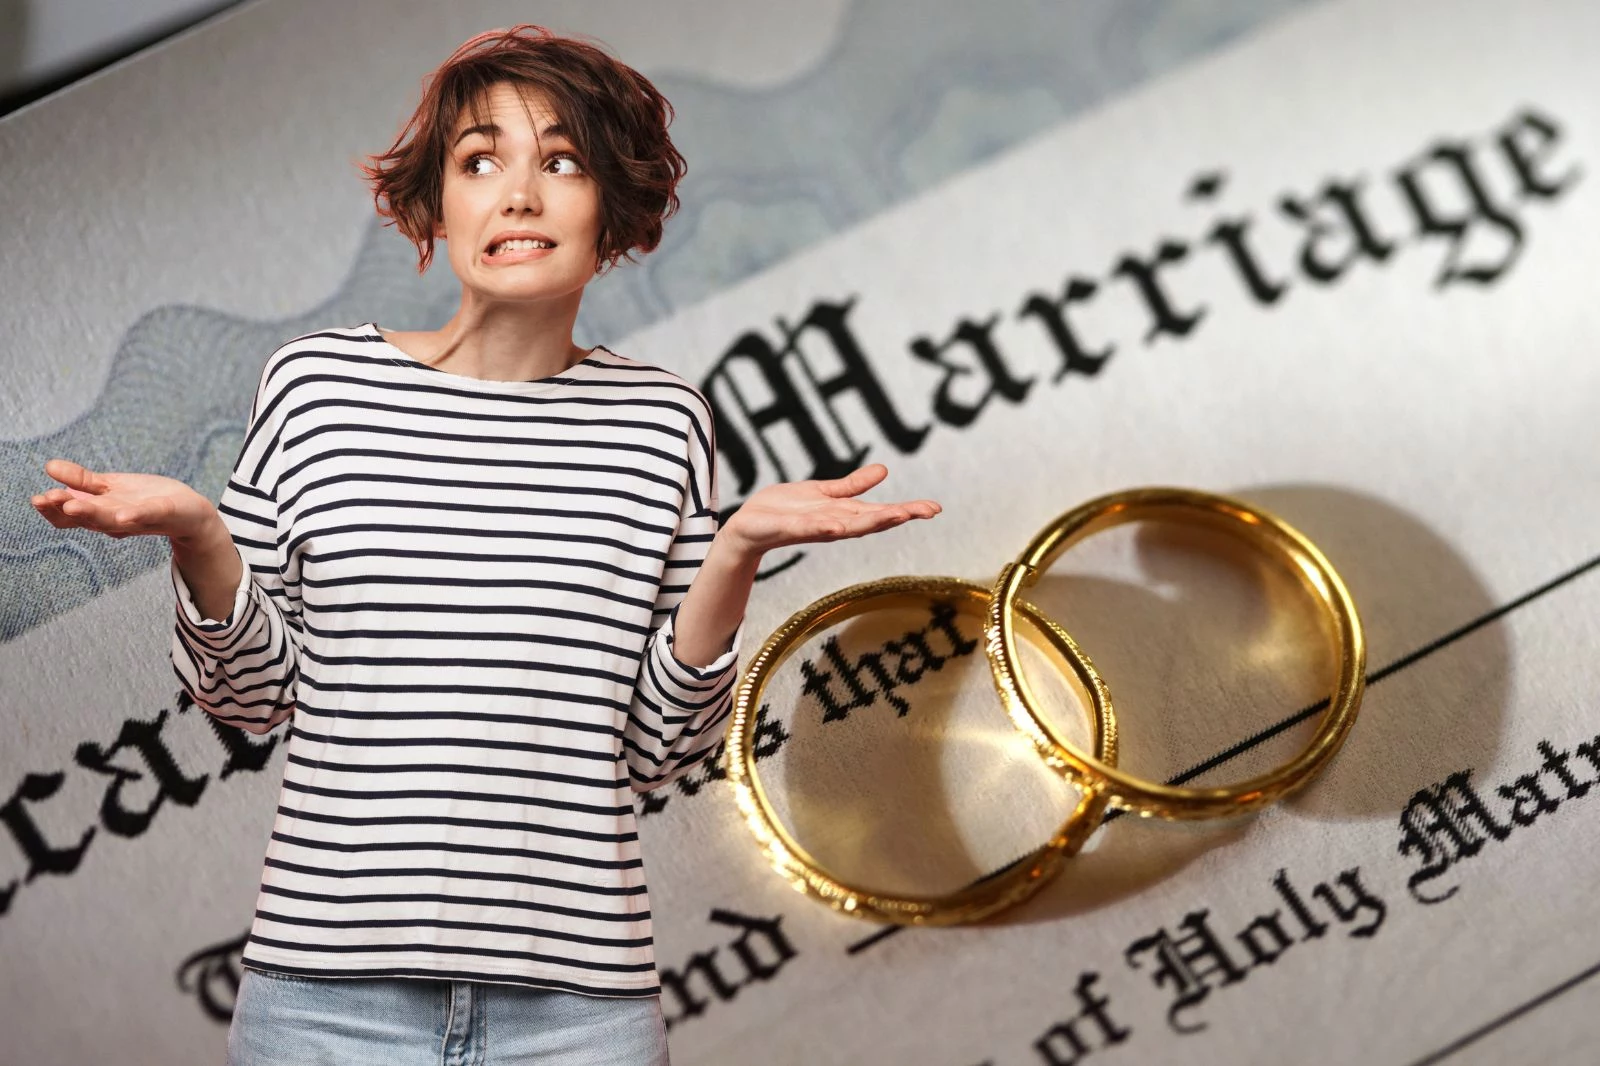 Can You Legally Marry Your First Cousin In New York?